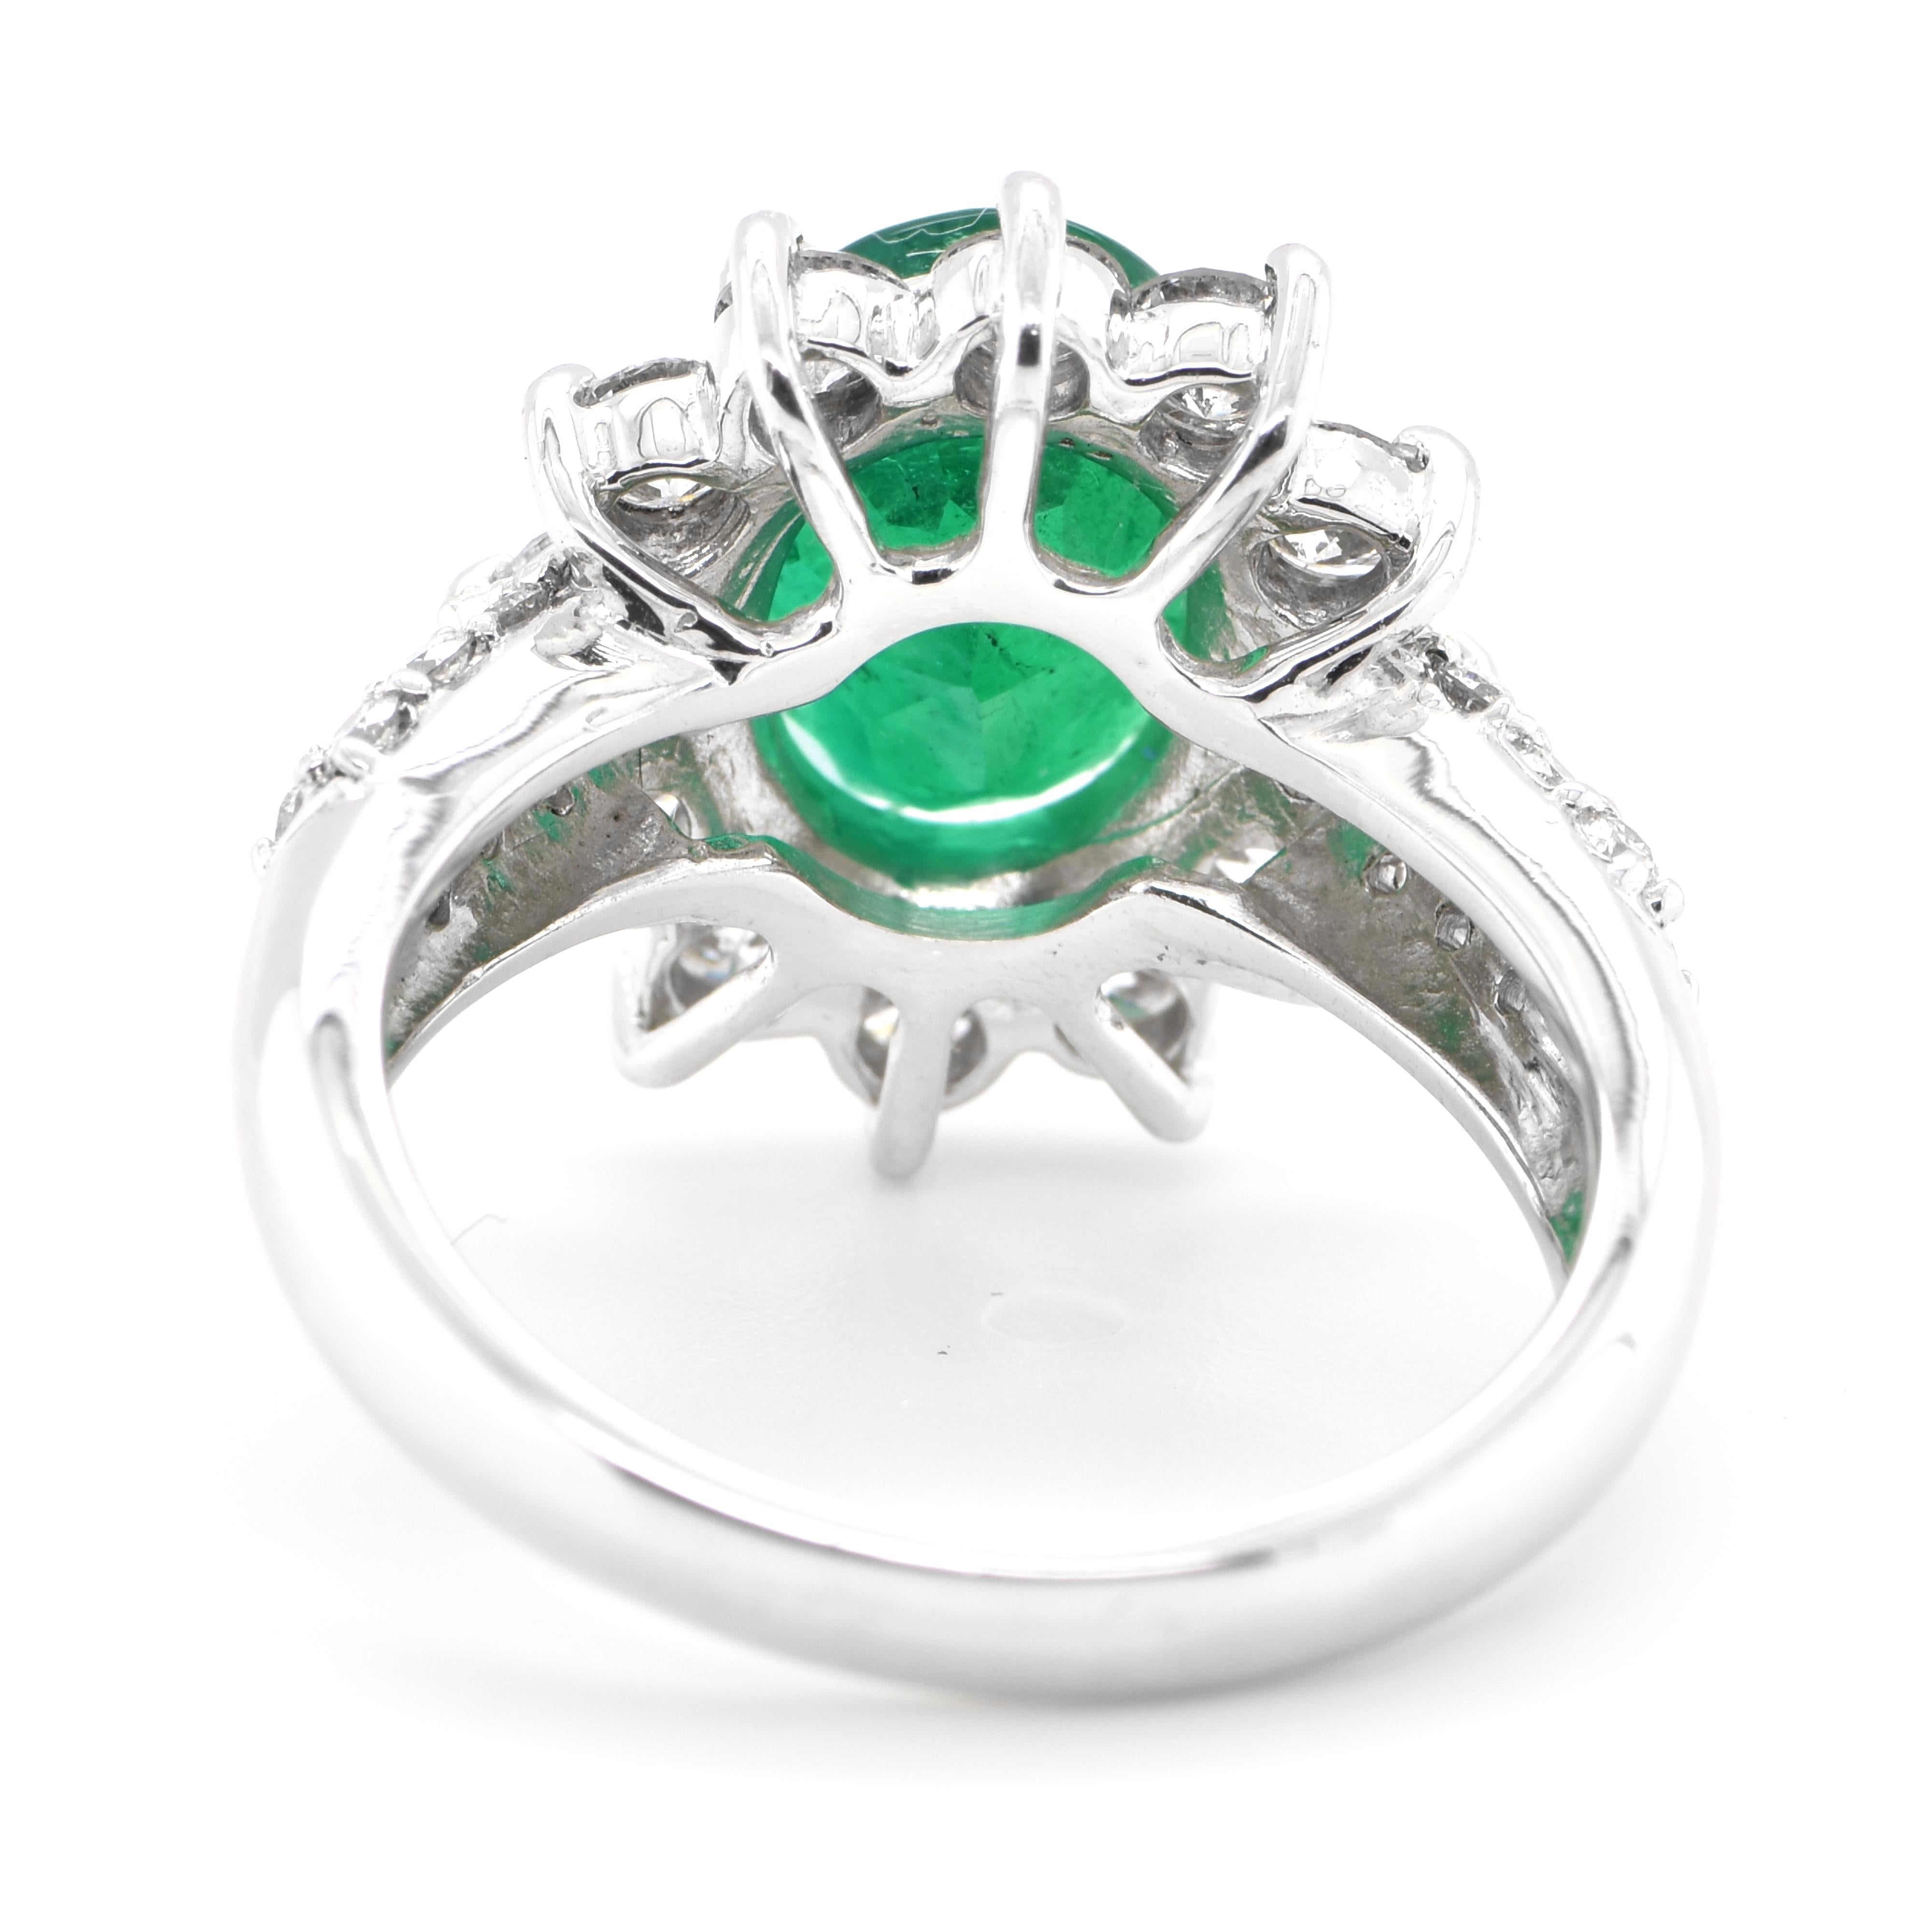 Women's 2.61 Carat Natural Oval-Cut Emerald and Diamond Halo Ring Set in Platinum For Sale